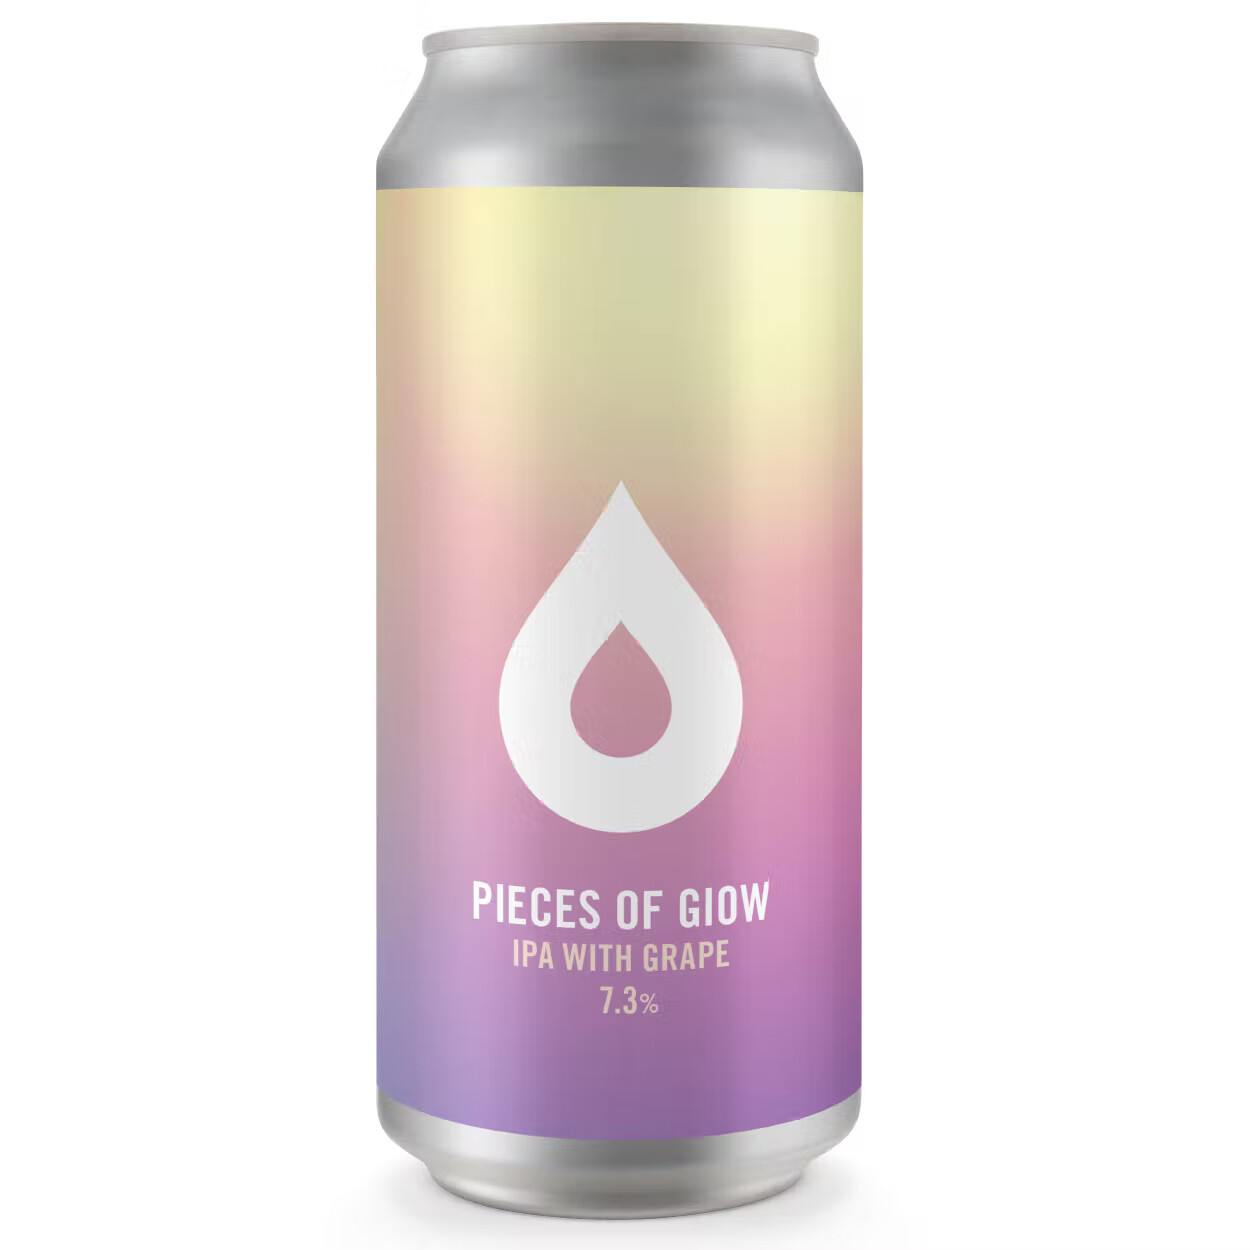 Polly's Pieces Of Glow IPA With Grape